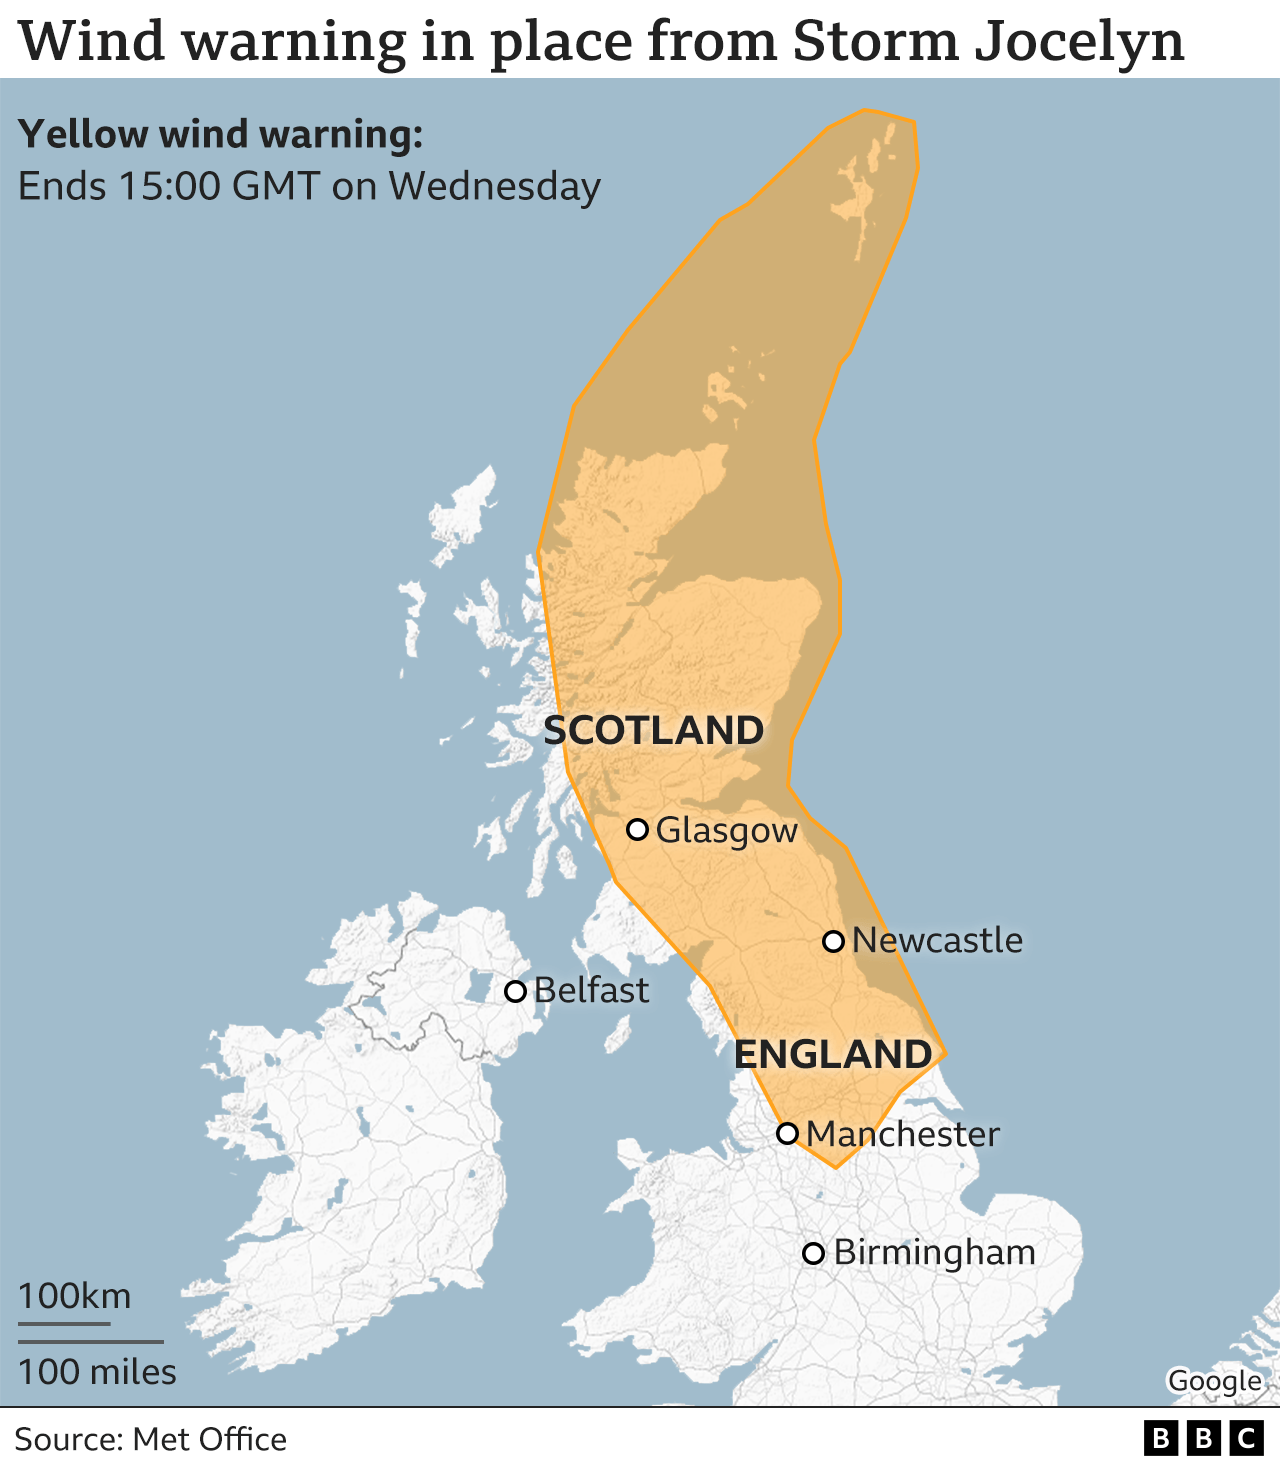 An image showing wind warnings in Scotland and northern England